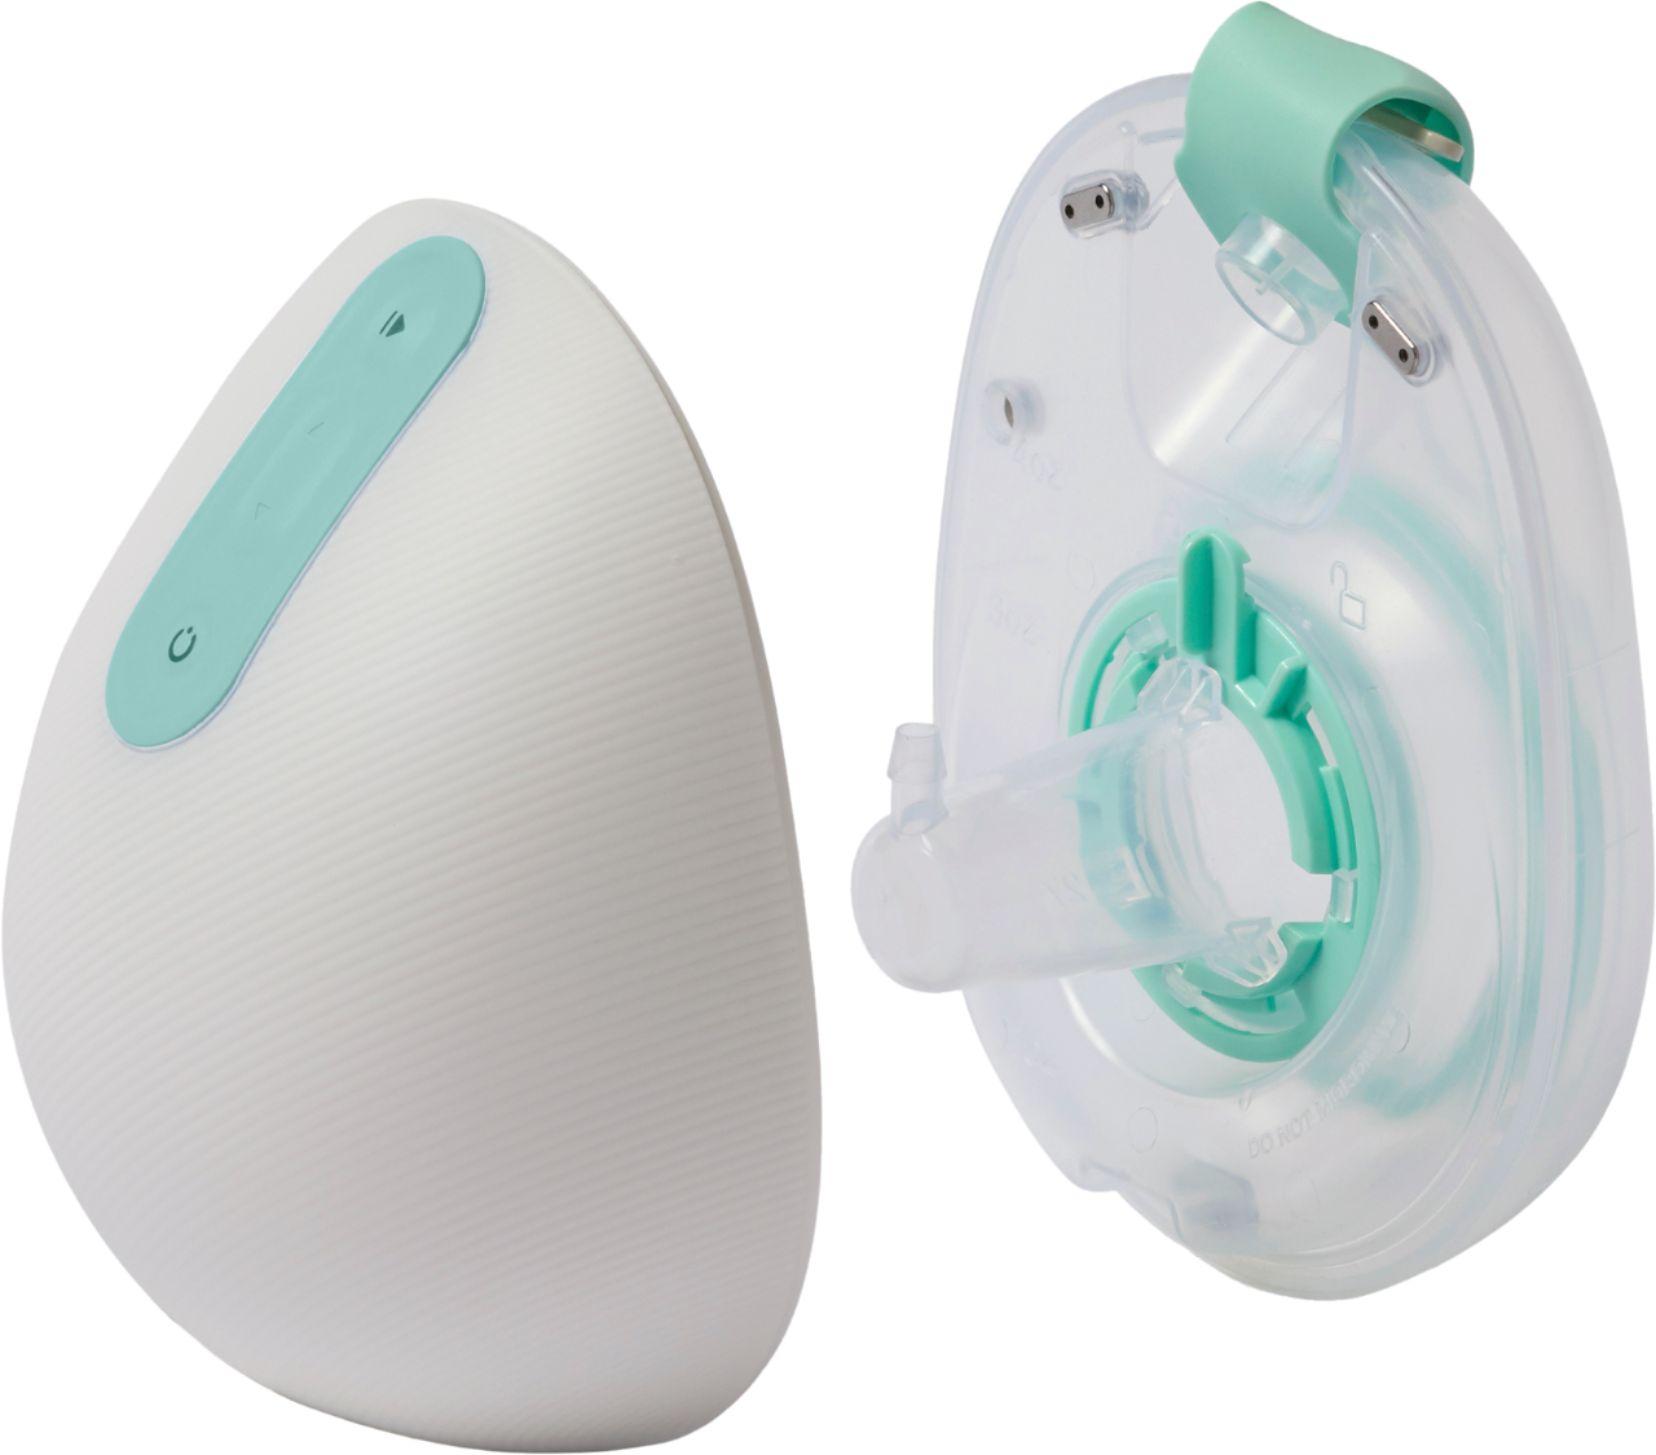 Willow breast pump finally gets reusable milk container, freeing